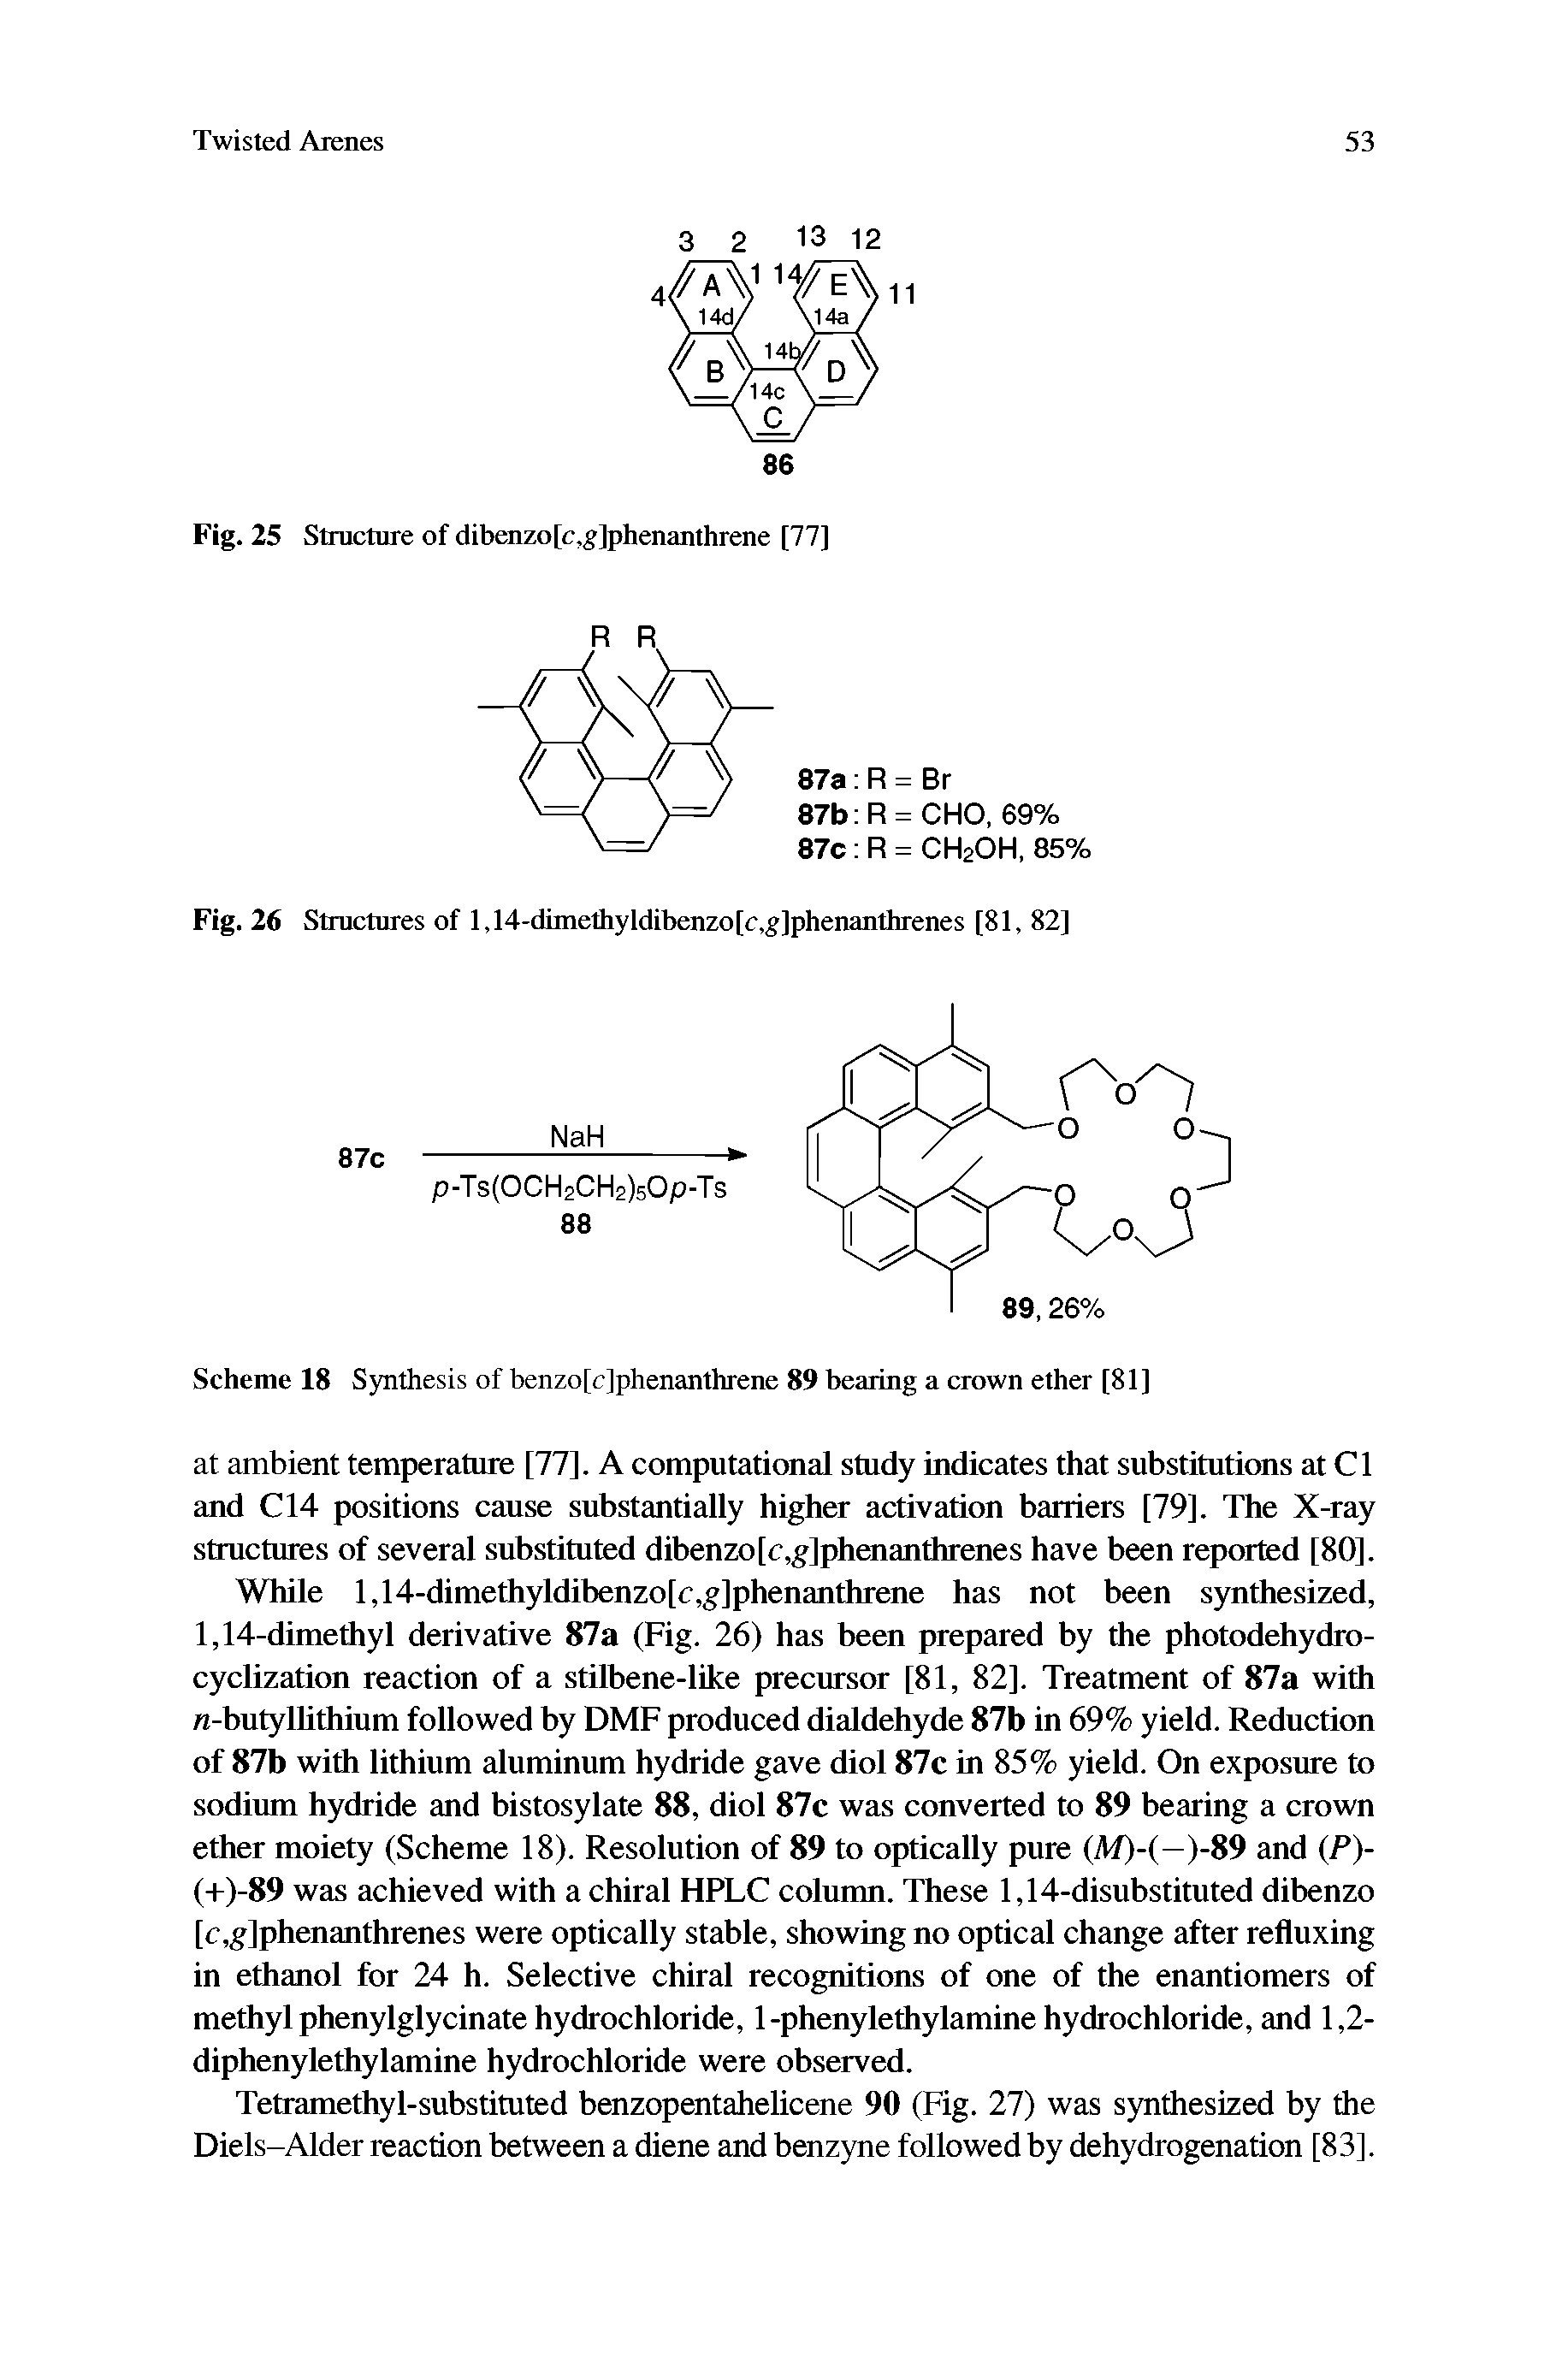 Scheme 18 Synthesis of benzo[c]phenanthrene 89 bearing a crown ether [81]...